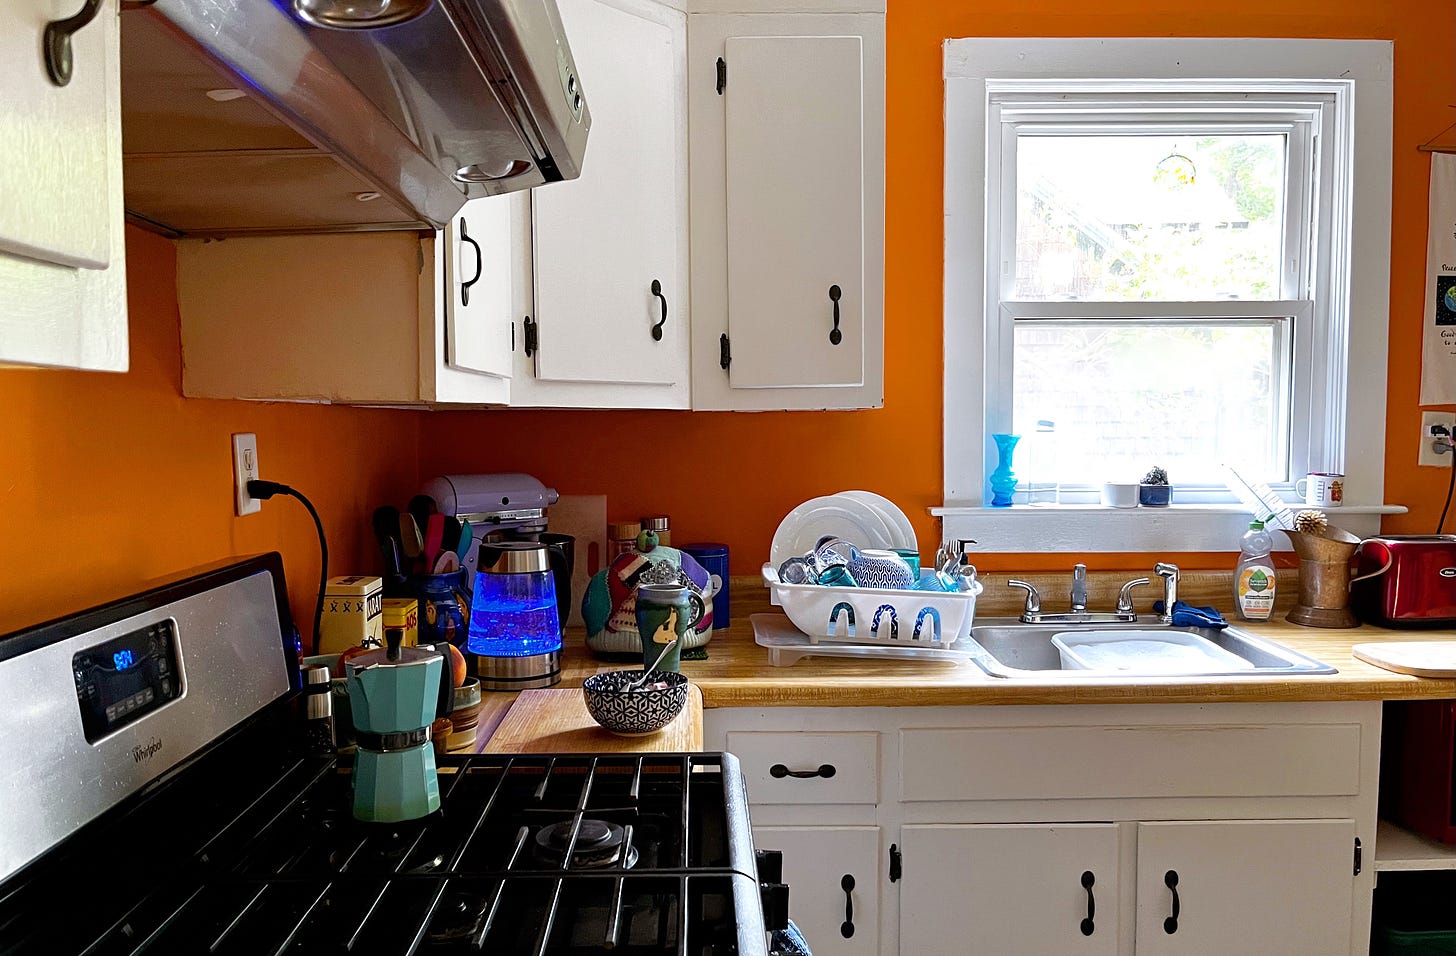 bright orange walls and ancient white kitchen cupboards, kitchen clutter includes turquoise glassware and coffee pot